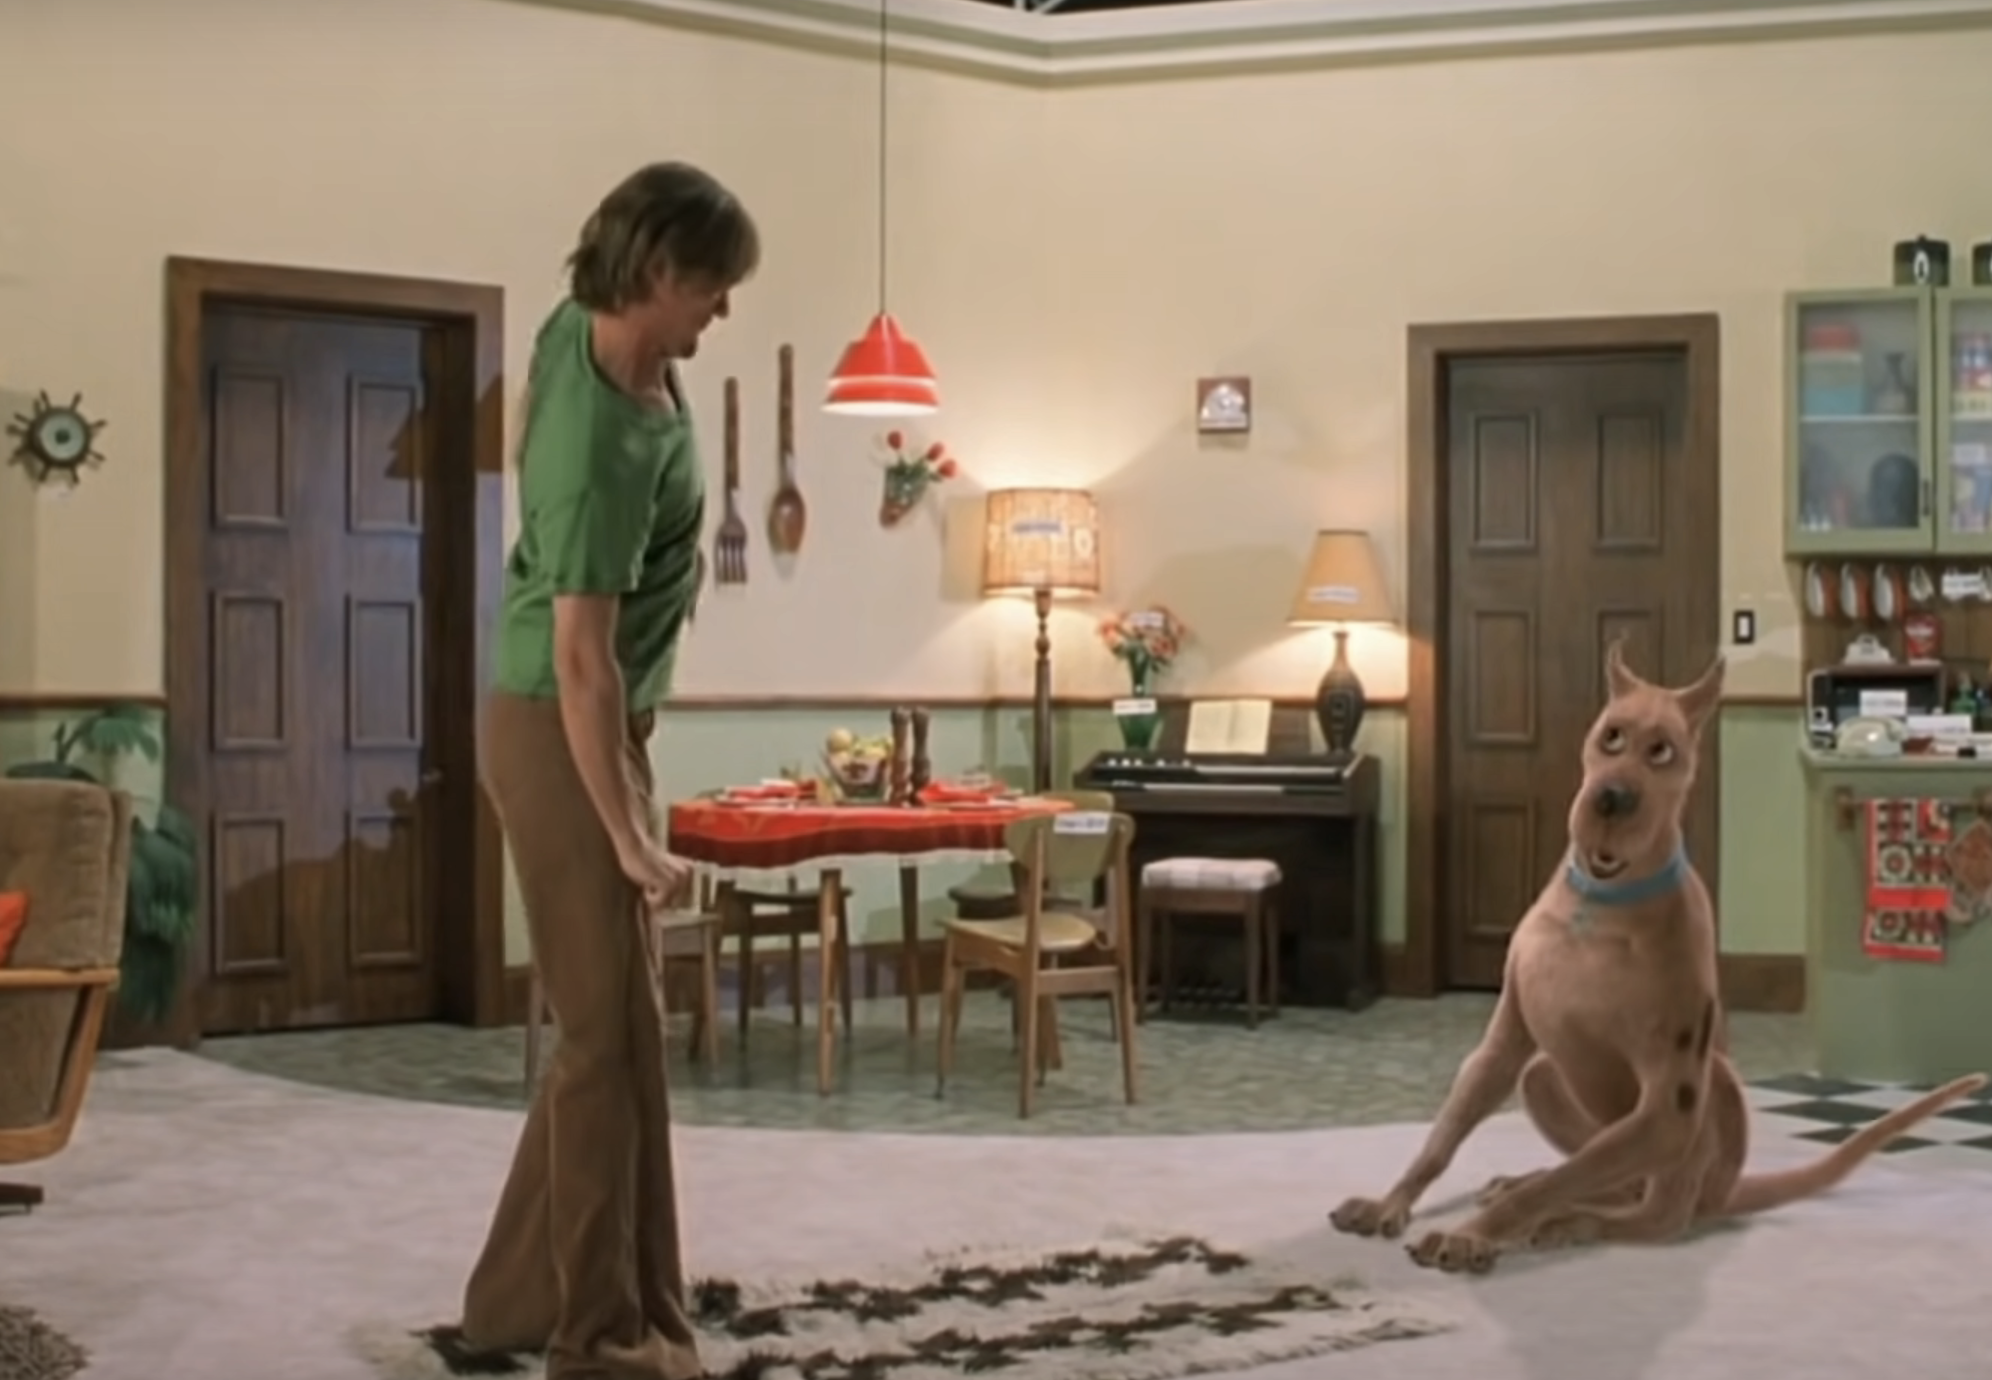 Shaggy, wearing a green tee, stands opposite Scooby-Doo in a room from the movie. Scooby looks guilty